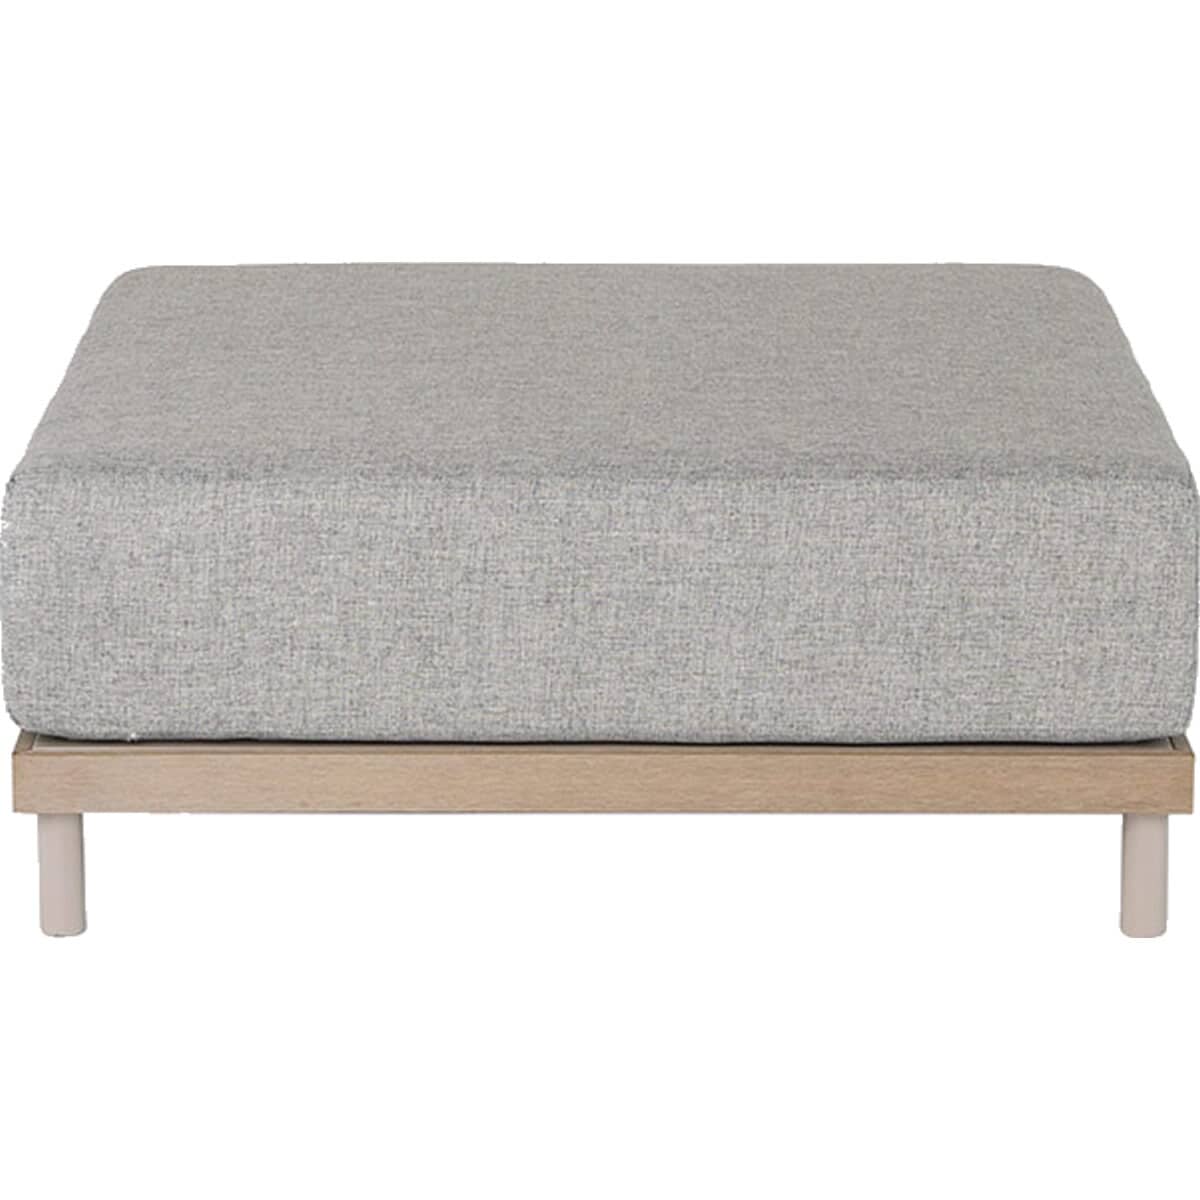 Kettler Mali Low Lounge - Footstool with Cushion